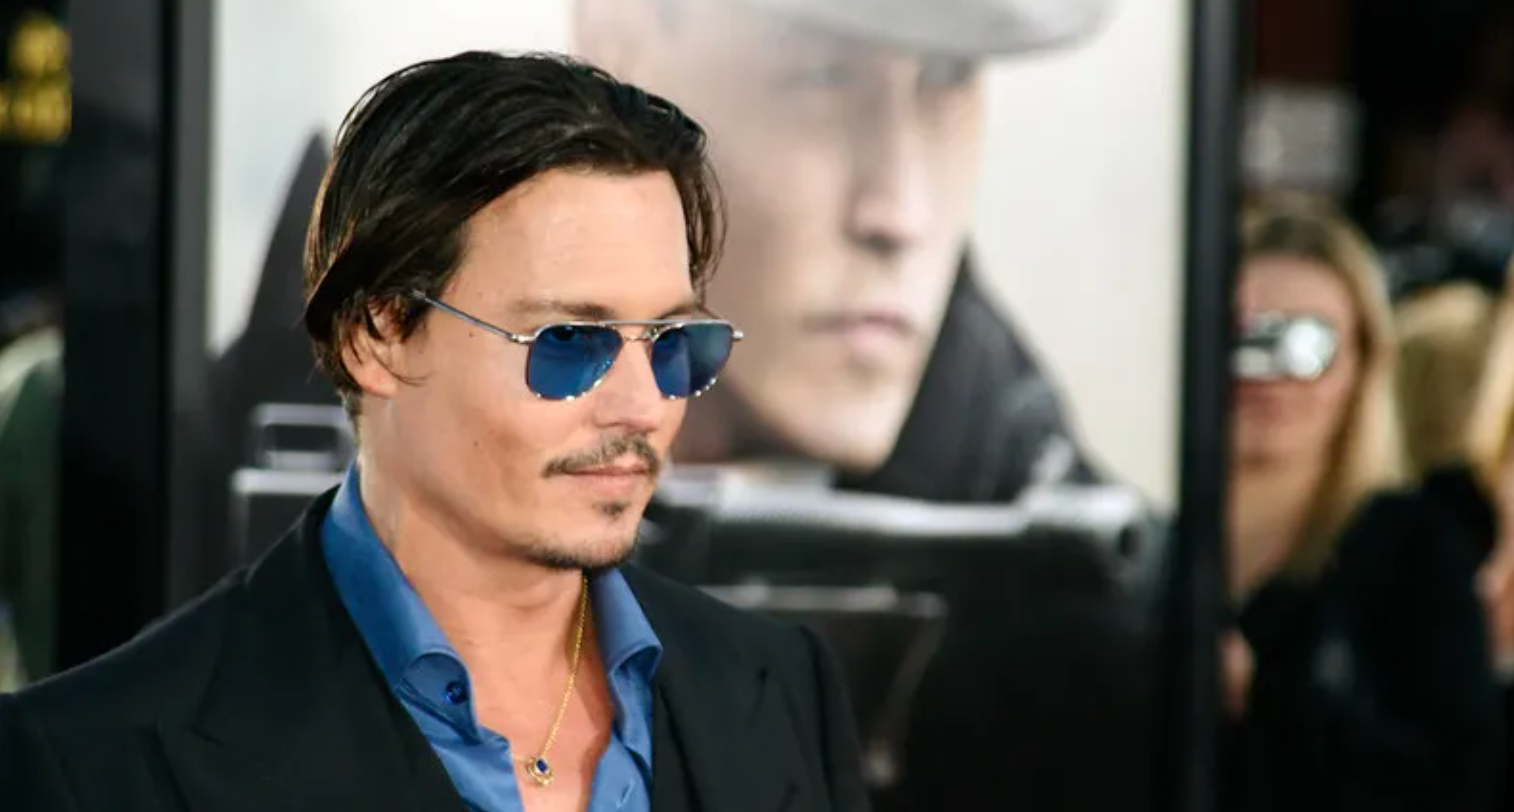 Johnny Depp Is Dating His Attorney: 'Their Chemistry Is Off The Charts'